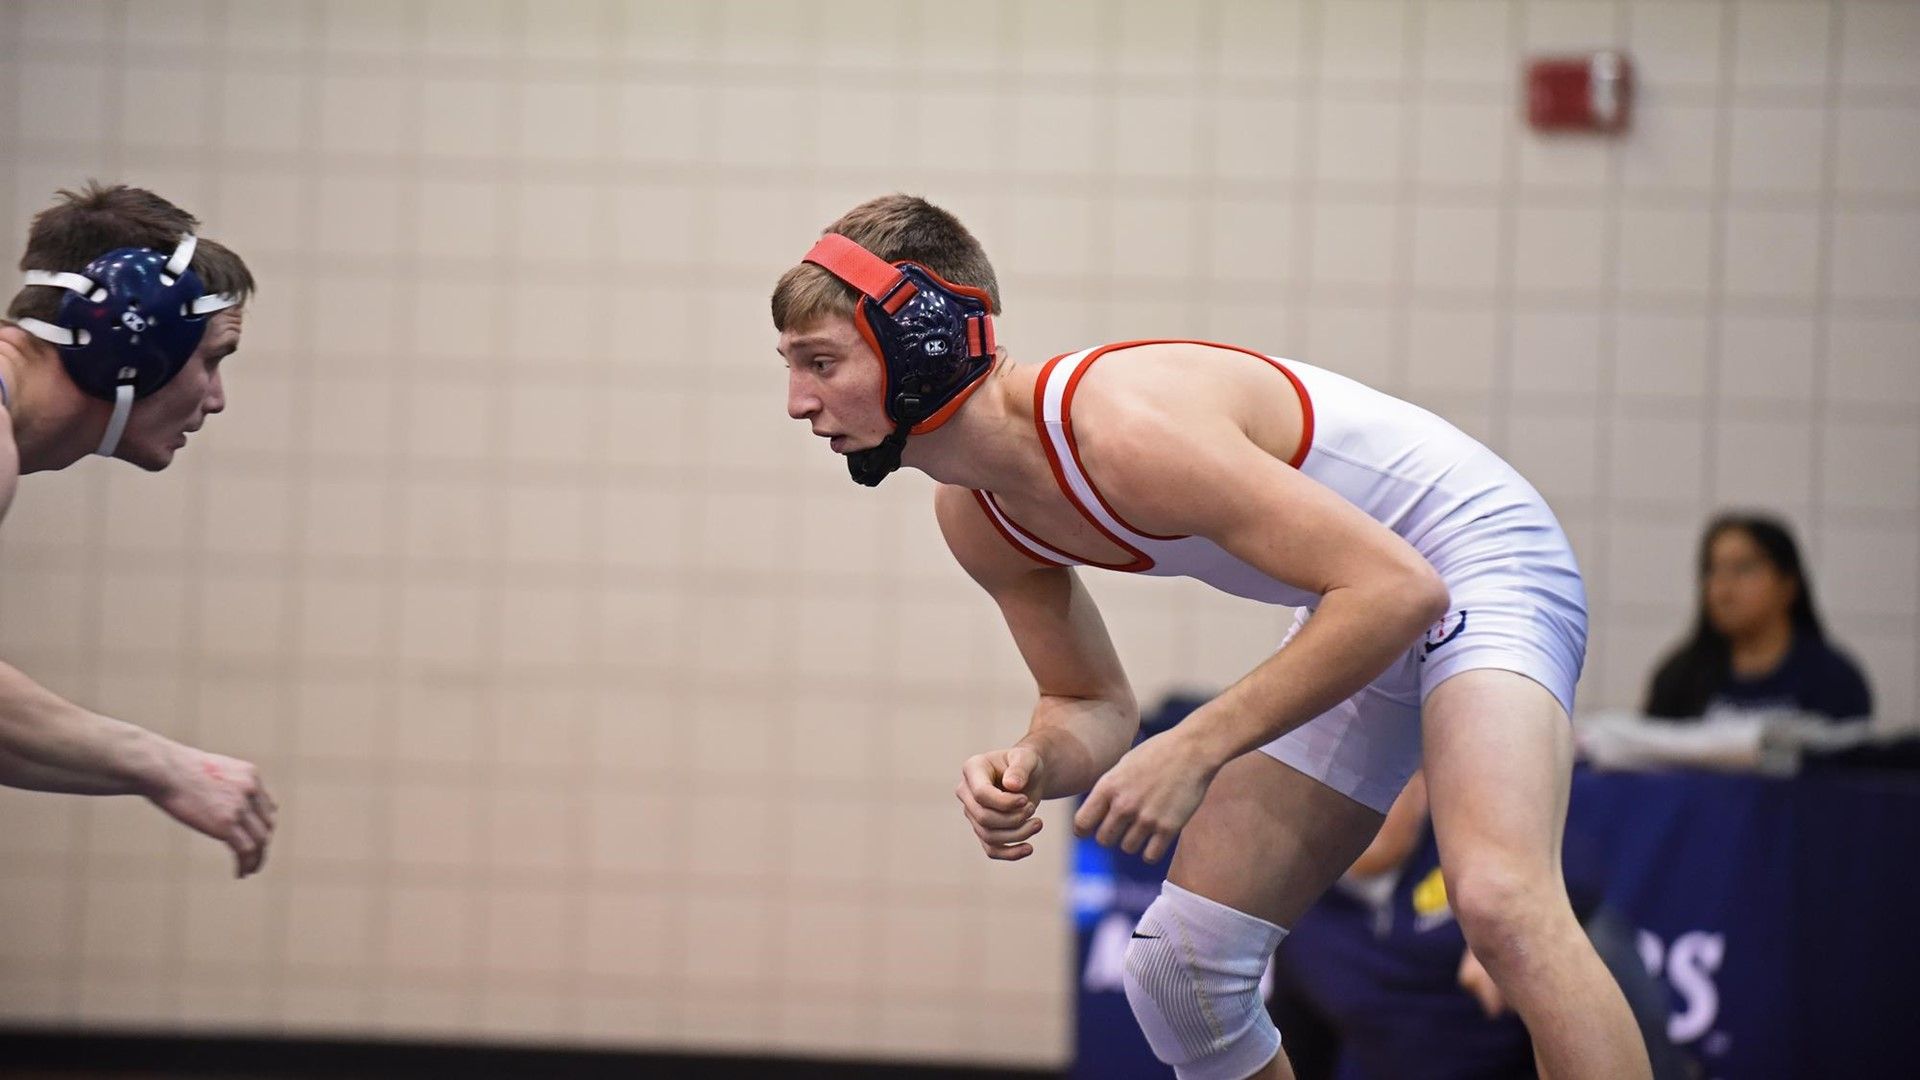 Wrestlers focus on fitness to prepare for the season